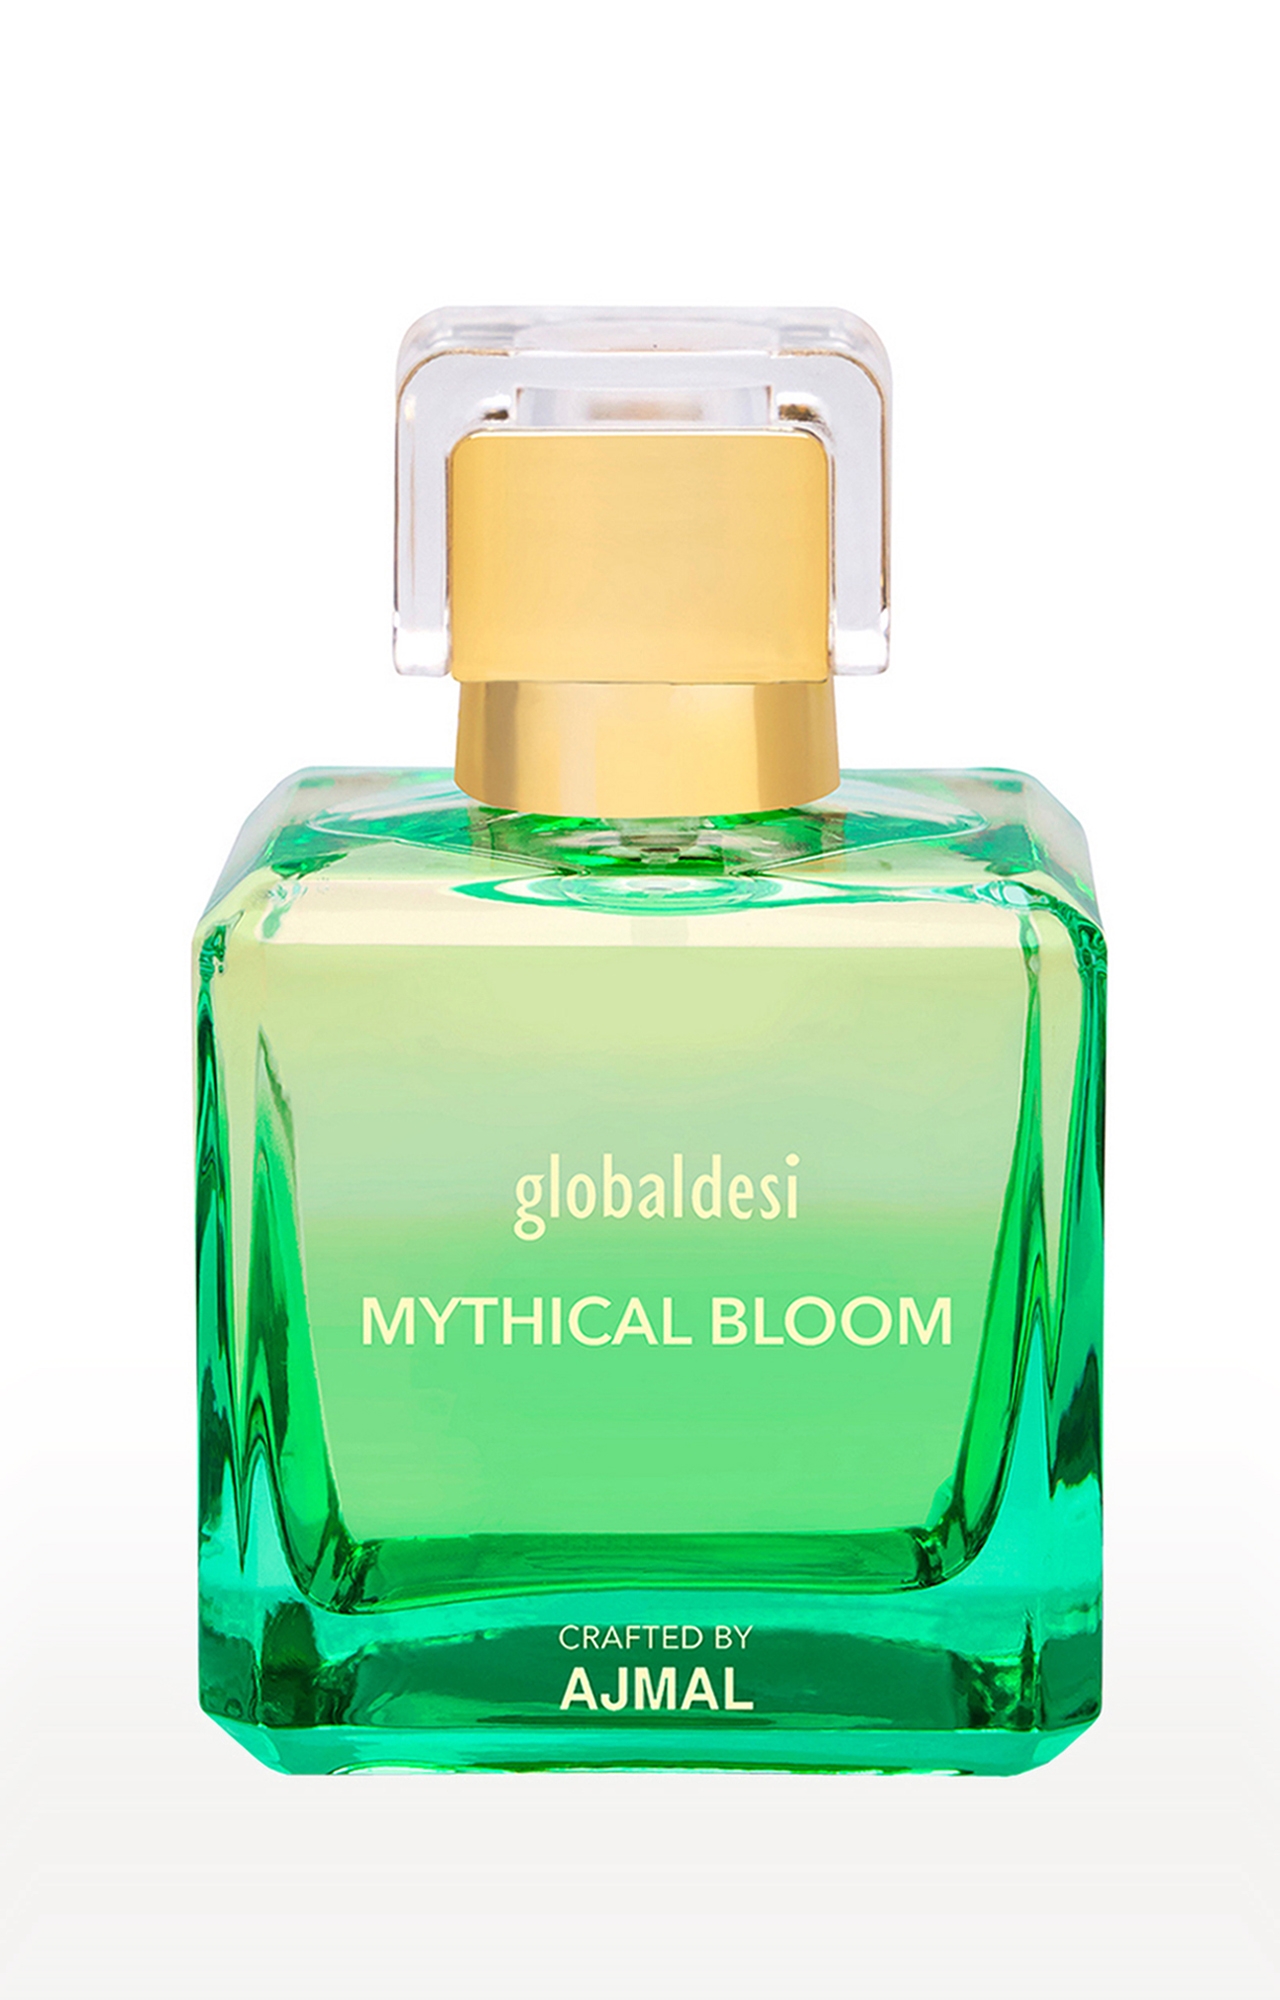 Global Desi Crafted By Ajmal | Global Mythical Bloom Trance Eau De Parfum 50ML Long Lasting Scent Spray Gift For Women Crafted By Ajmal 1